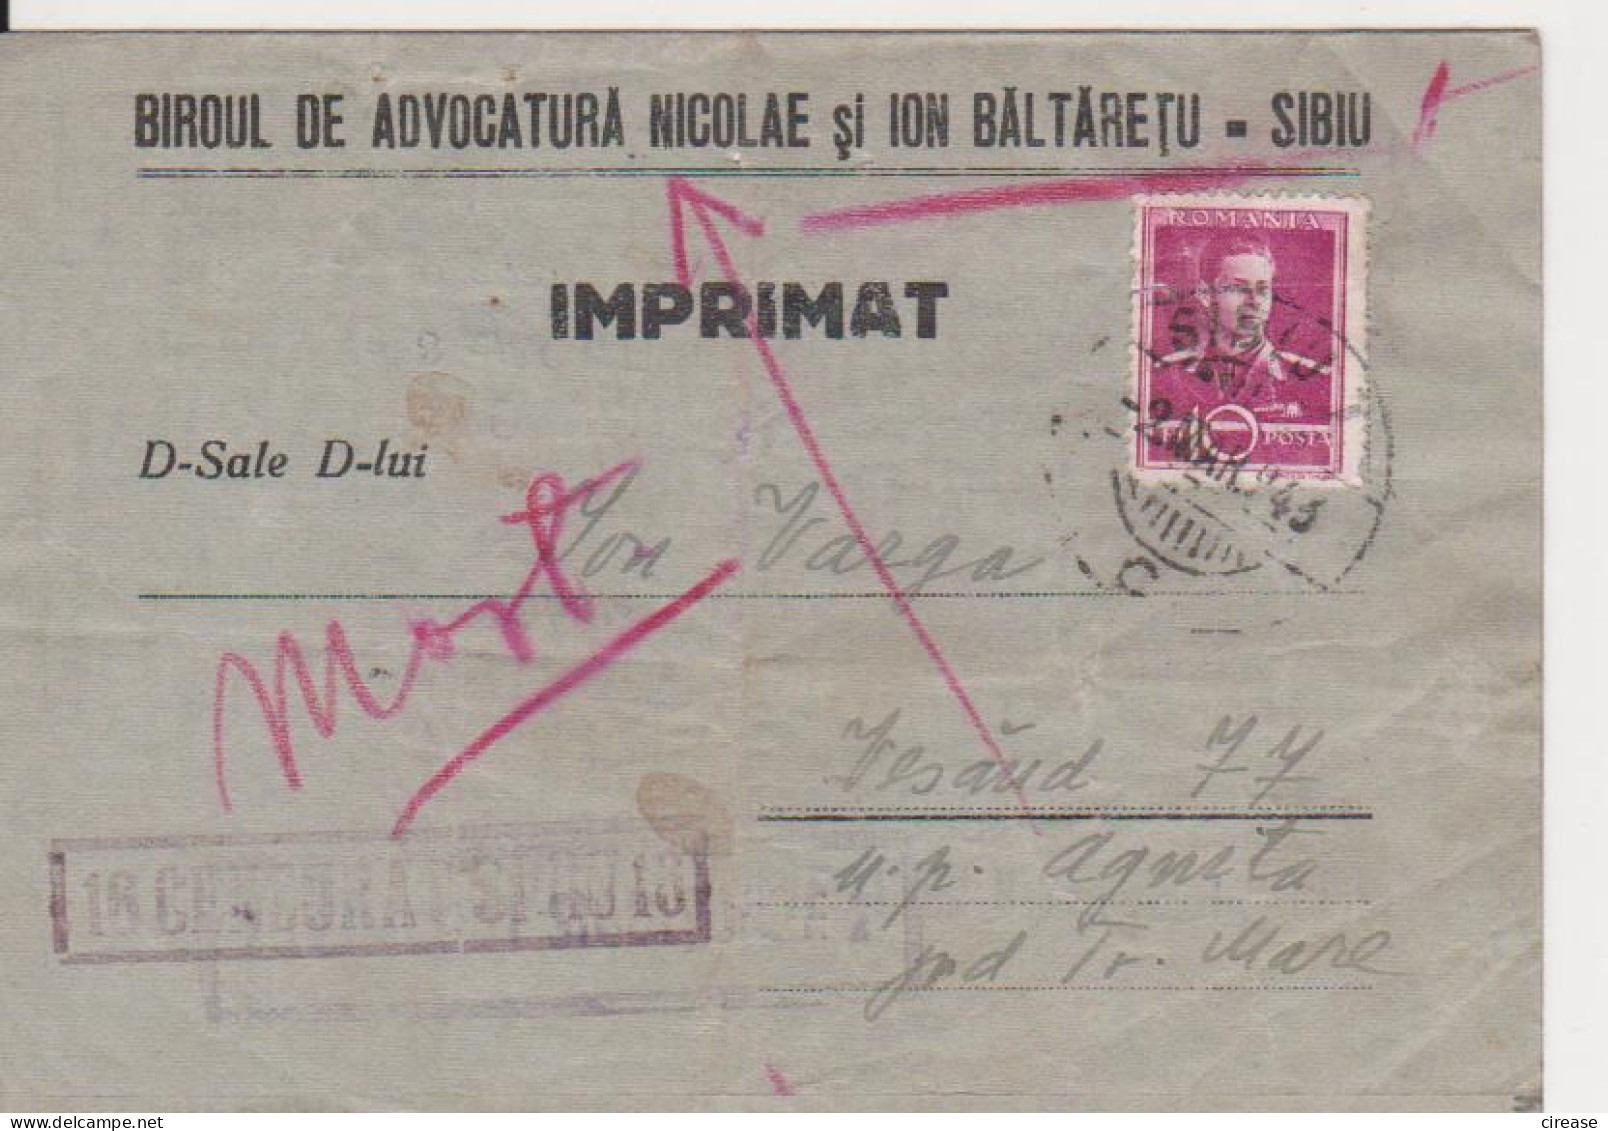 WW2 Cover 1943 Censorship, Commercial Office Lawyer, King Mihai ROMANIA - World War 2 Letters